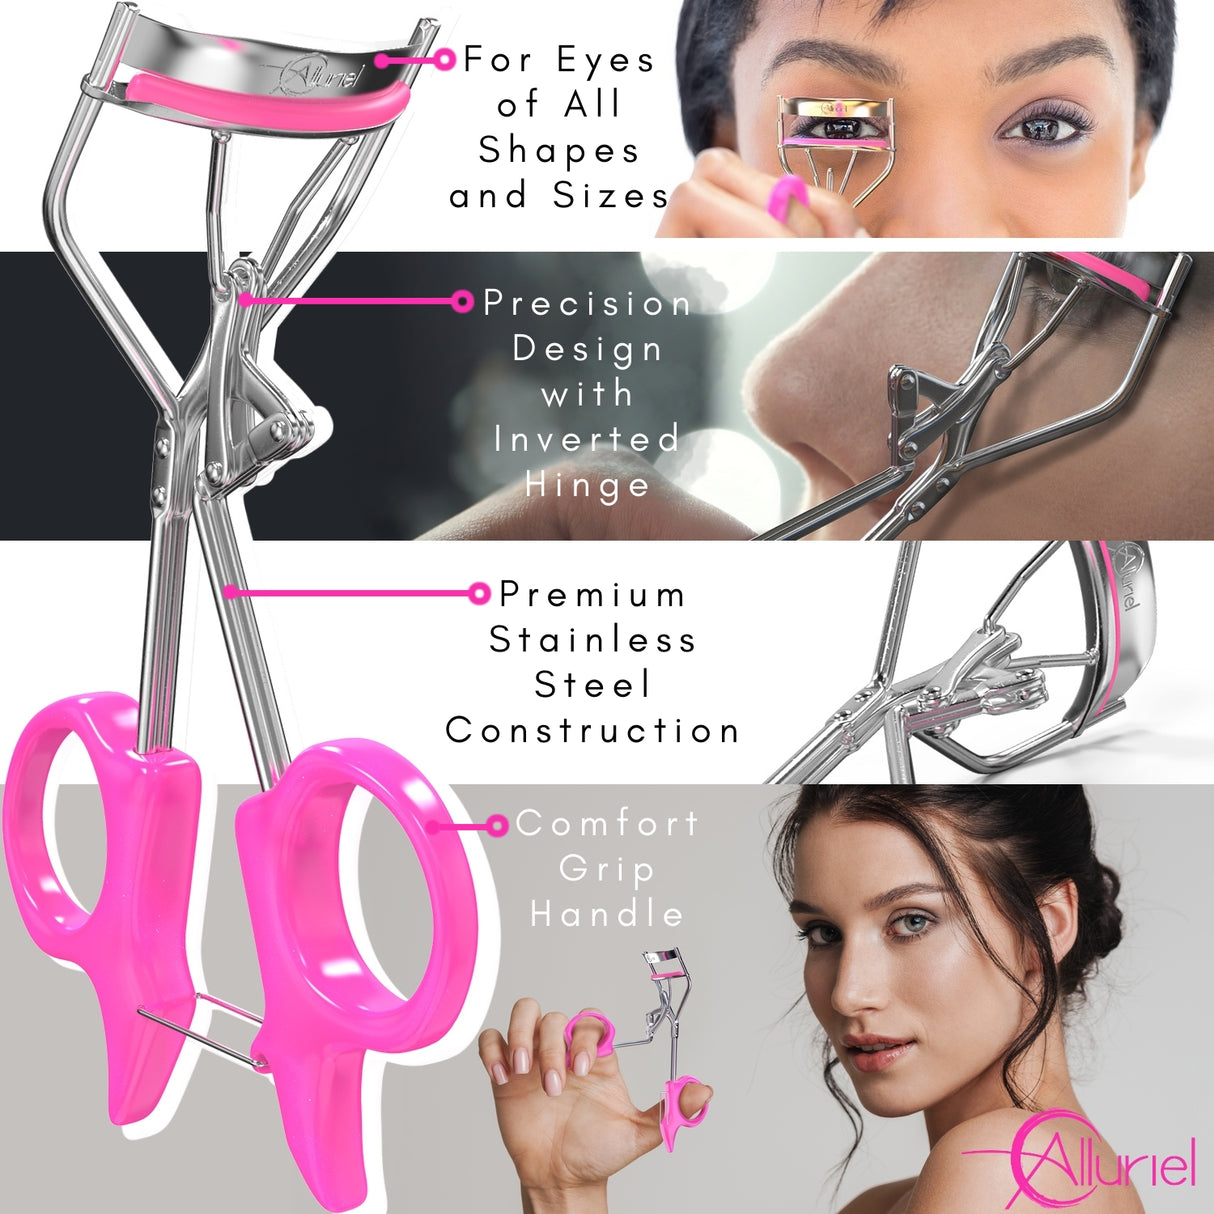 AllURIEL Deluxe Eyelash Curler Gift Set, Complete with Extra Refill Pads & Travel Case